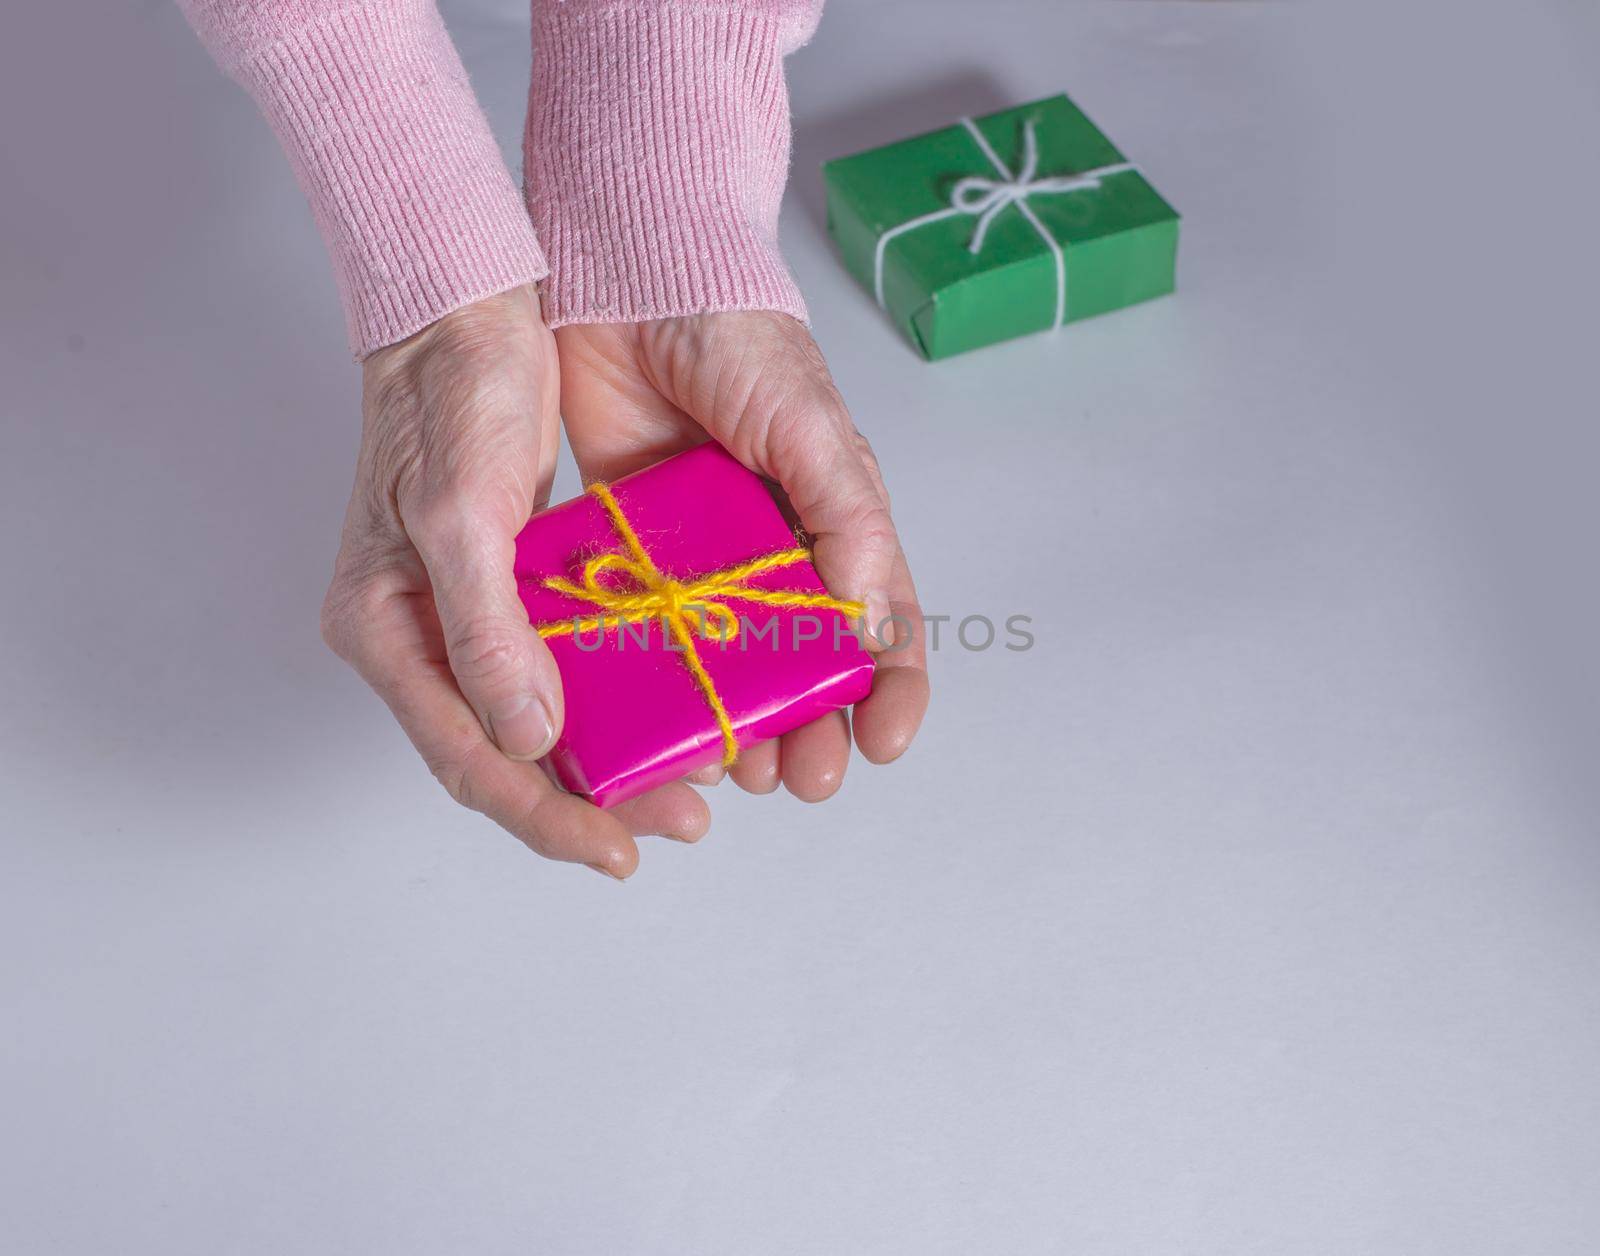 Red box in hands and green box on table. Gifts.